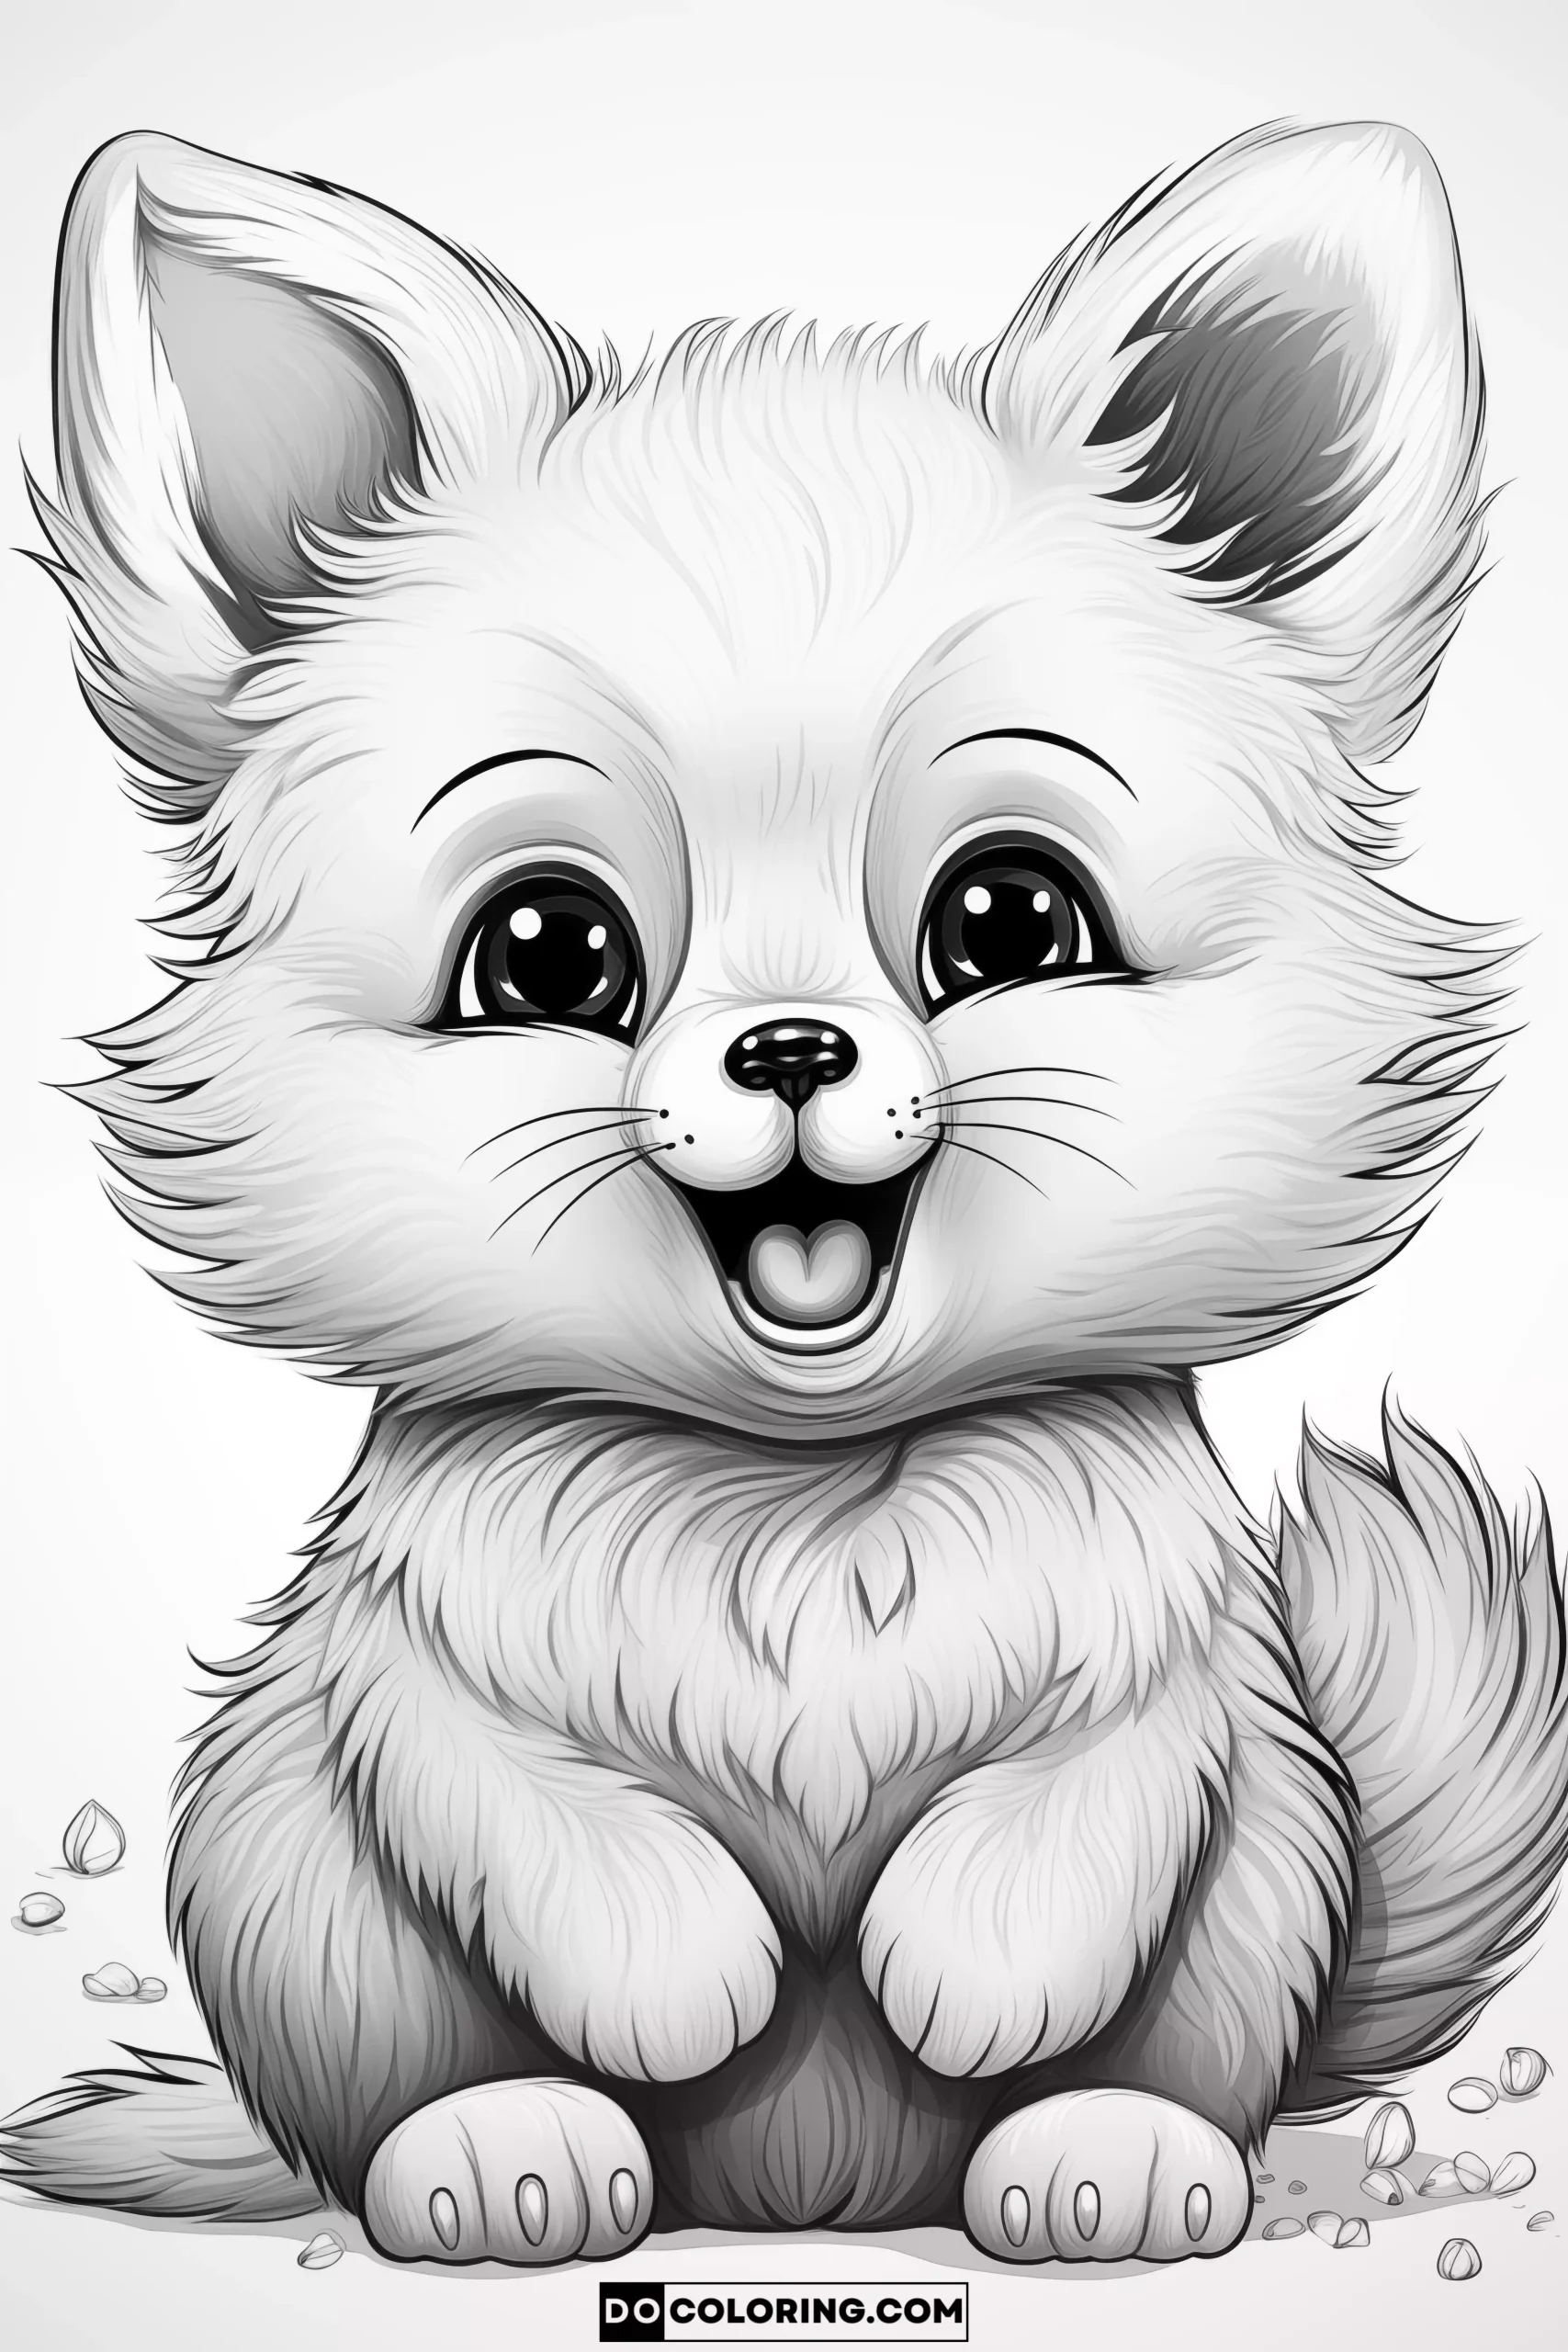 A realistic portrayal of a cute baby fox, designed for adults.